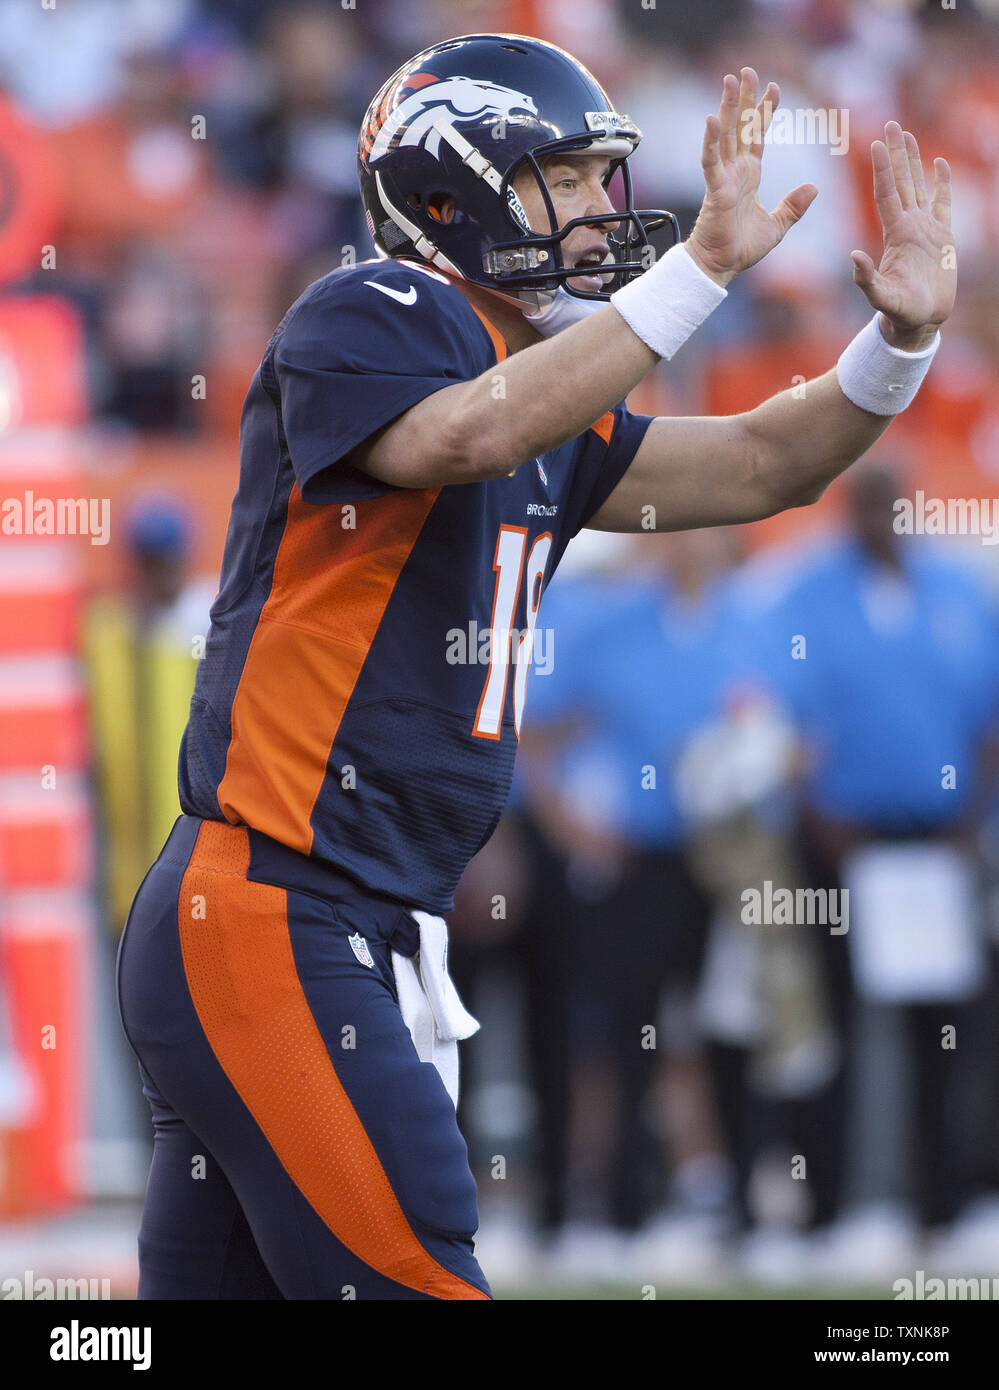 Denver Broncos quarterback Peyton Manning signals a new play against the Chargers at Sports Authority Field at Mile High on November 18, 2012 in Denver.   Manning led the Broncos to a 30-23 win over the San Diego Chargers.     UPI/Gary C. Caskey Stock Photo